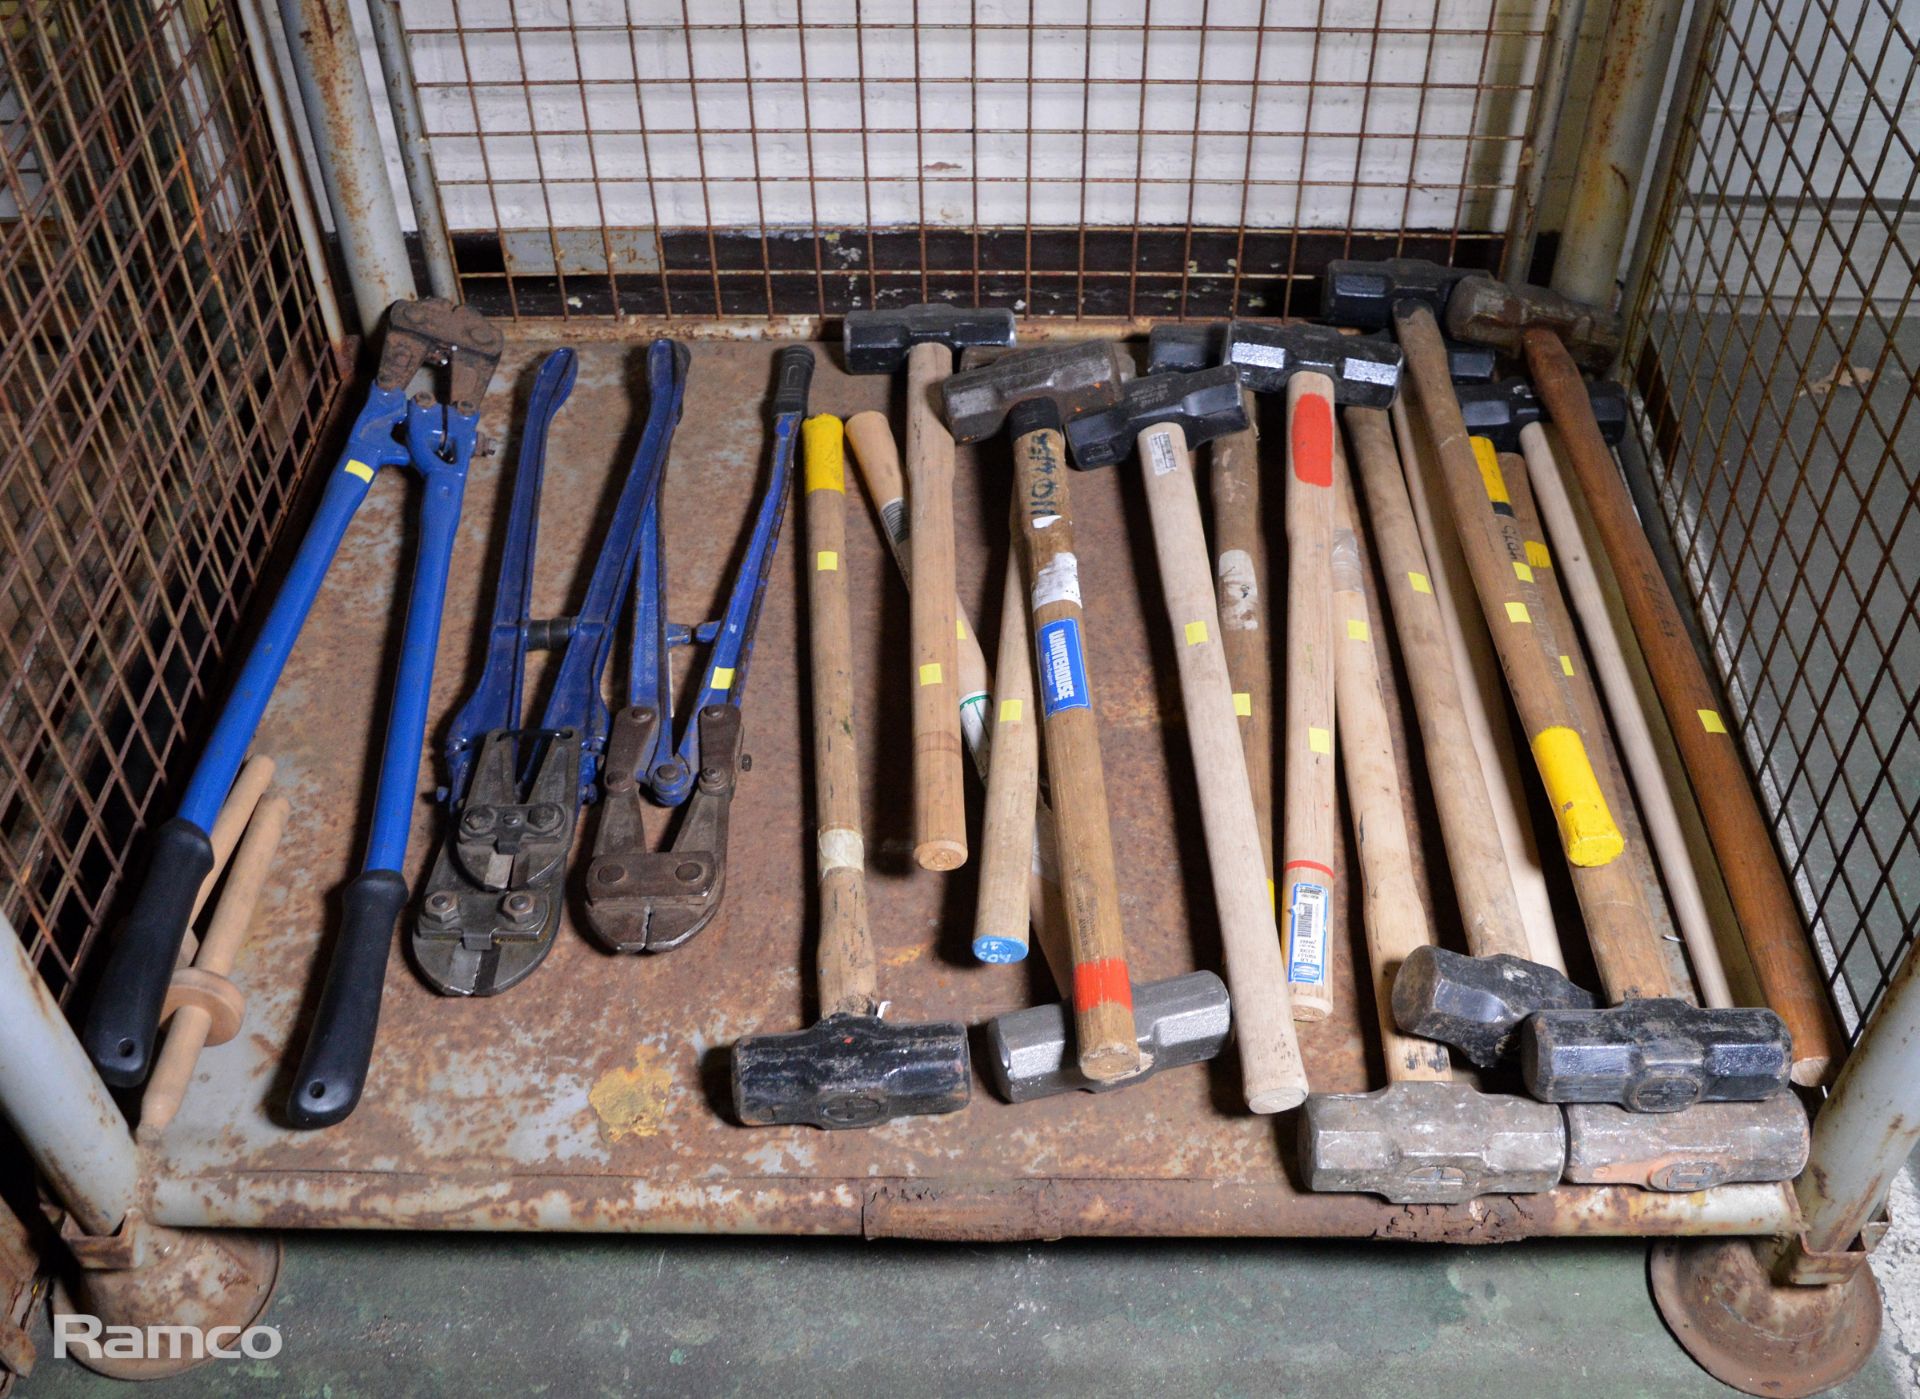 16x Sledge Hammers 7LB, 3x bolt croppers